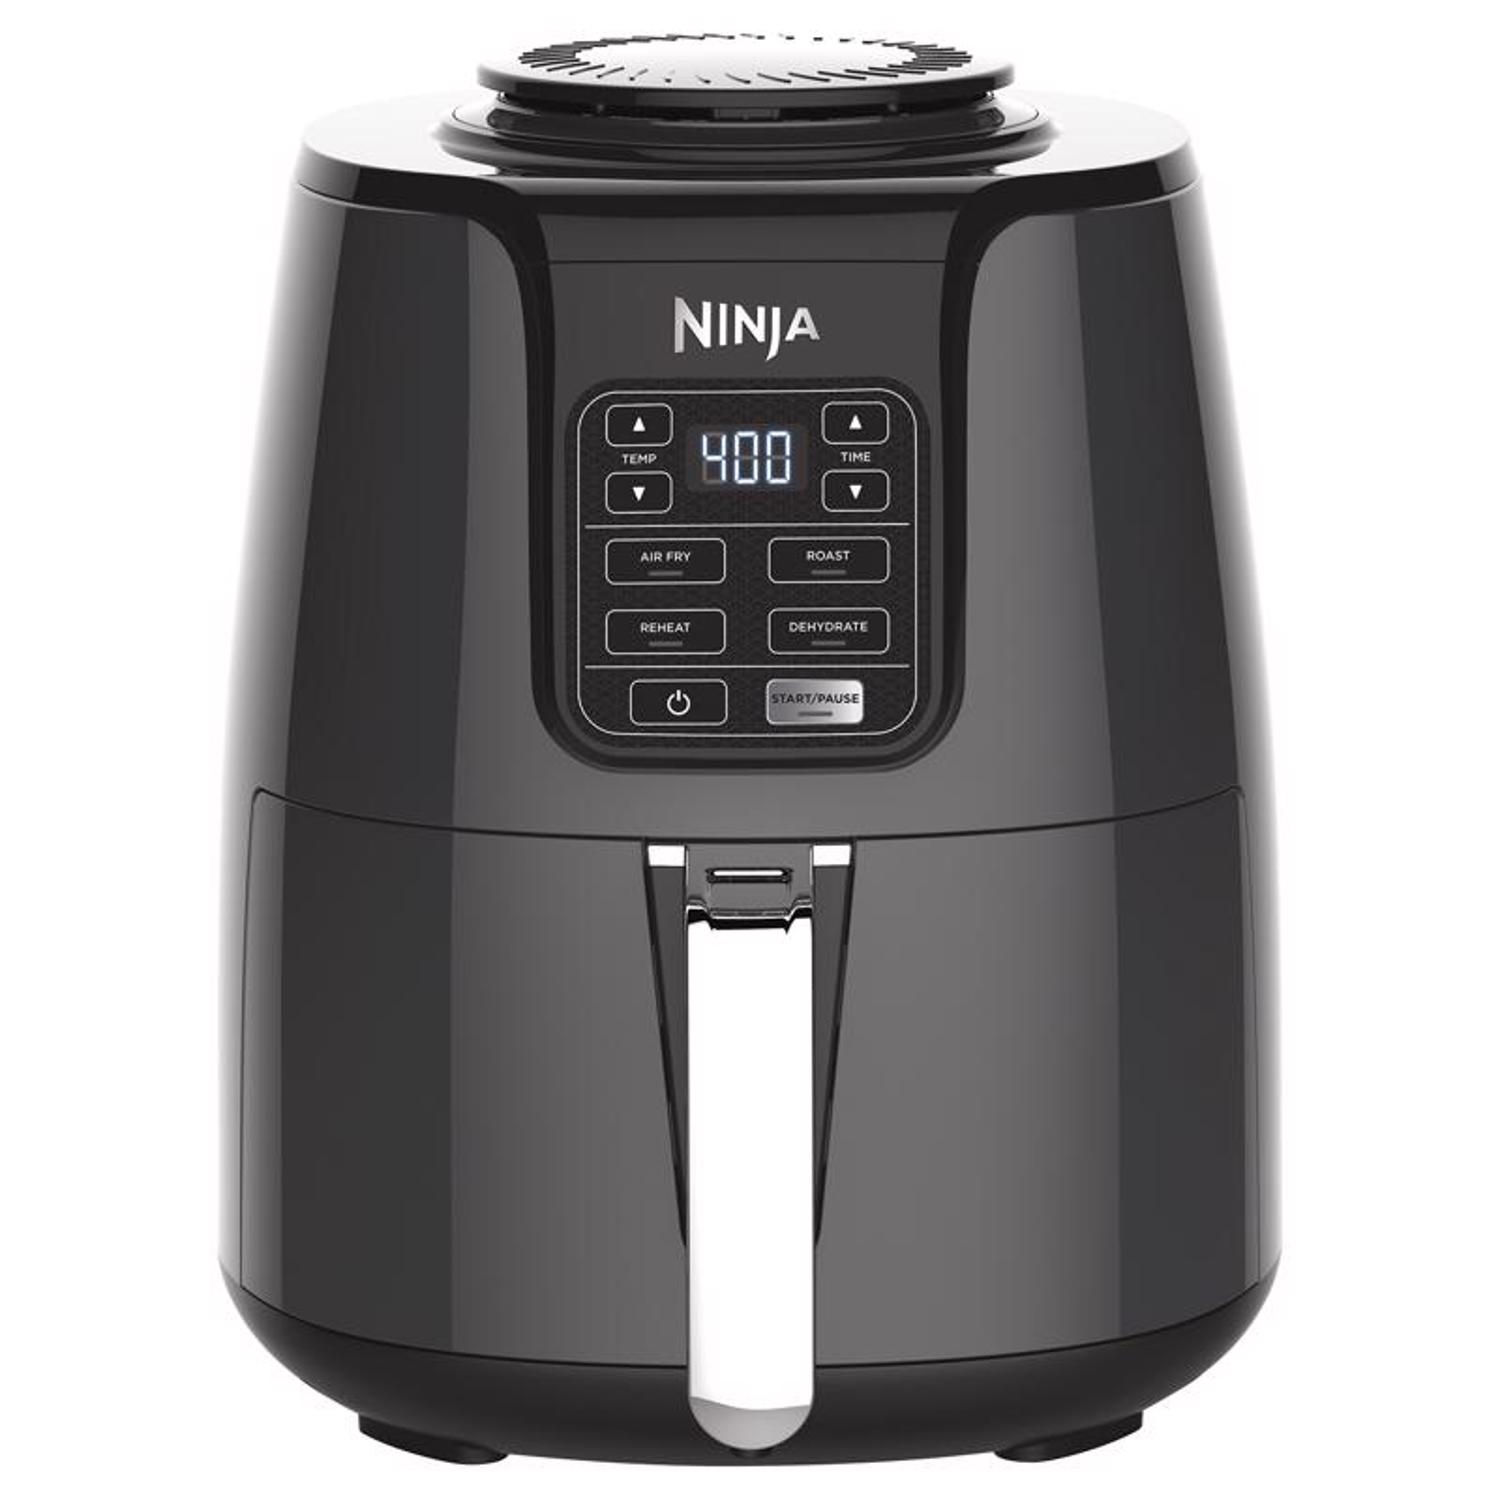 Ninja DZ302 Foodi 10-qt. 6-in-1 DualZone Smart XL Air Fryer with 2  Independent Baskets, Match Cook & Smart Finish to Air Fry, Air Broil,  Roast, Bake, Dehydrate, & Keep Warm, Black 